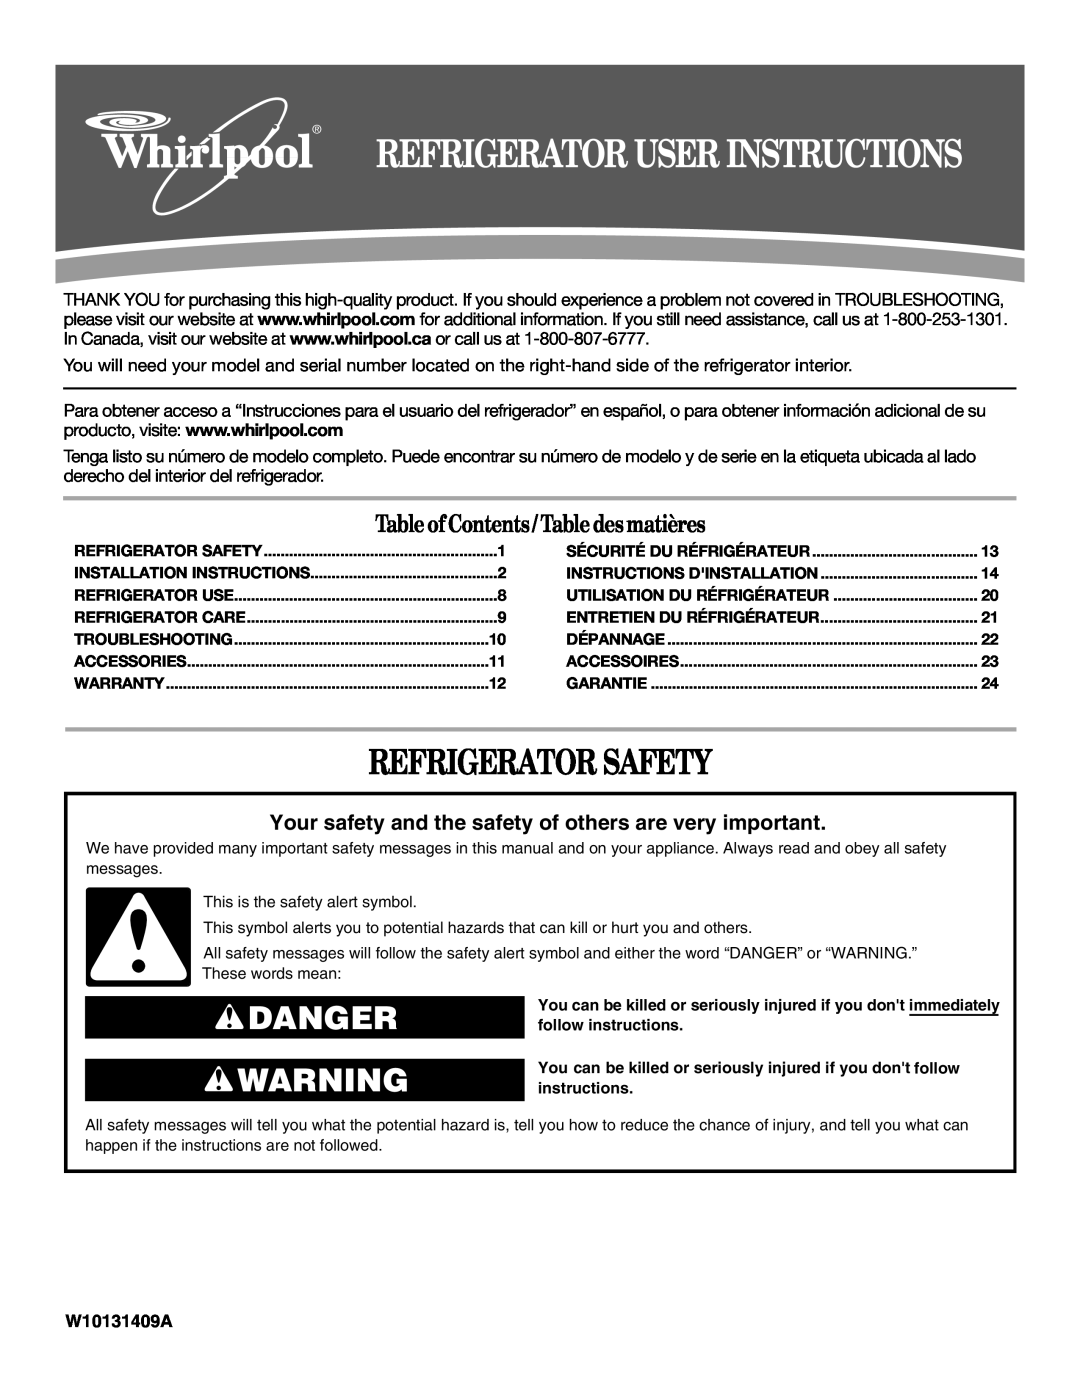 Whirlpool ET1MHKXM installation instructions Refrigerator Safety, Danger, Table of Contents / Table desmatières 